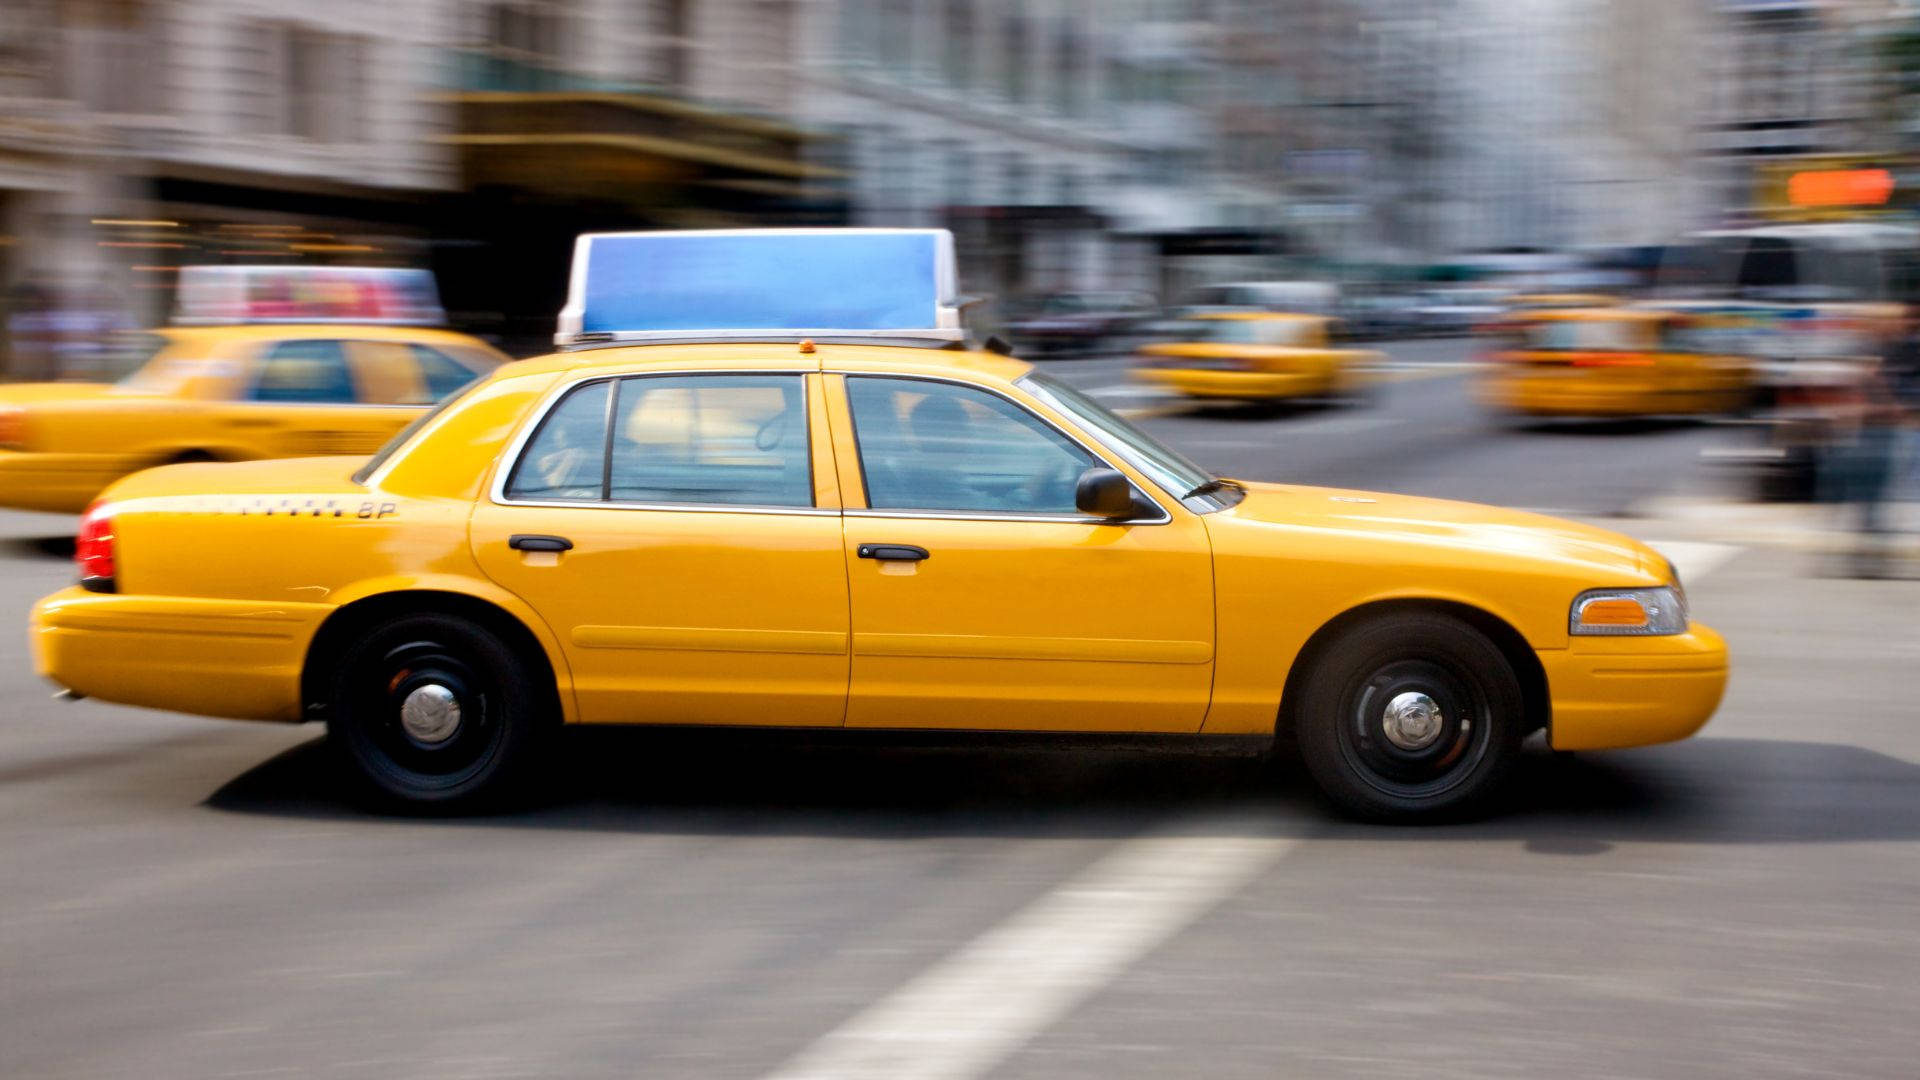 Taxi Fast Moving Motion Wallpaper